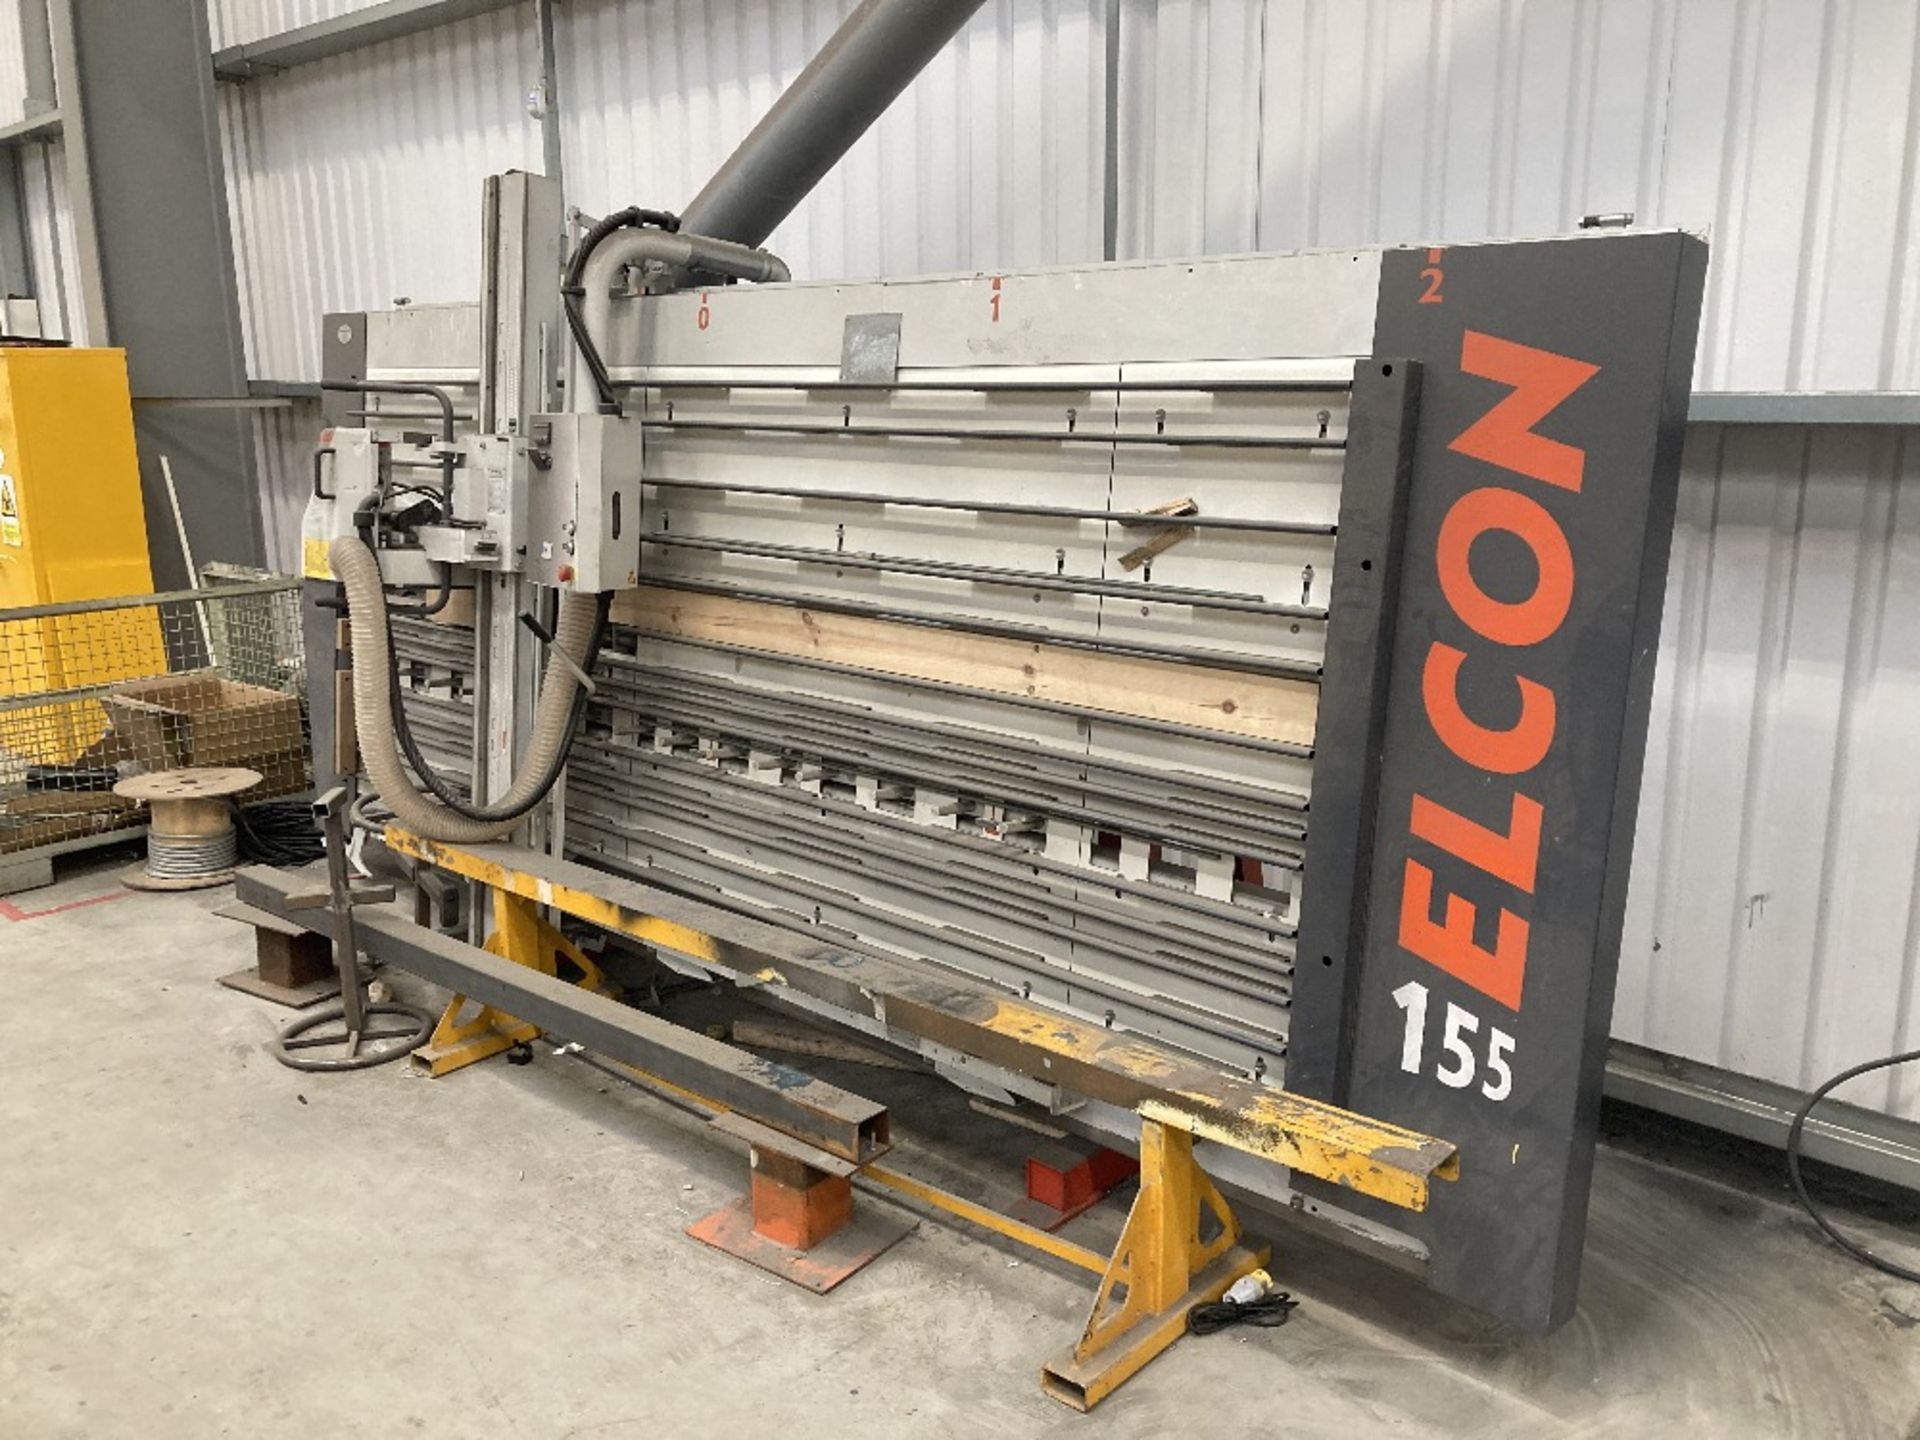 Elcon 155 DS Vertical Panel Saw & Fike Dust Extraction Unit - Image 13 of 15